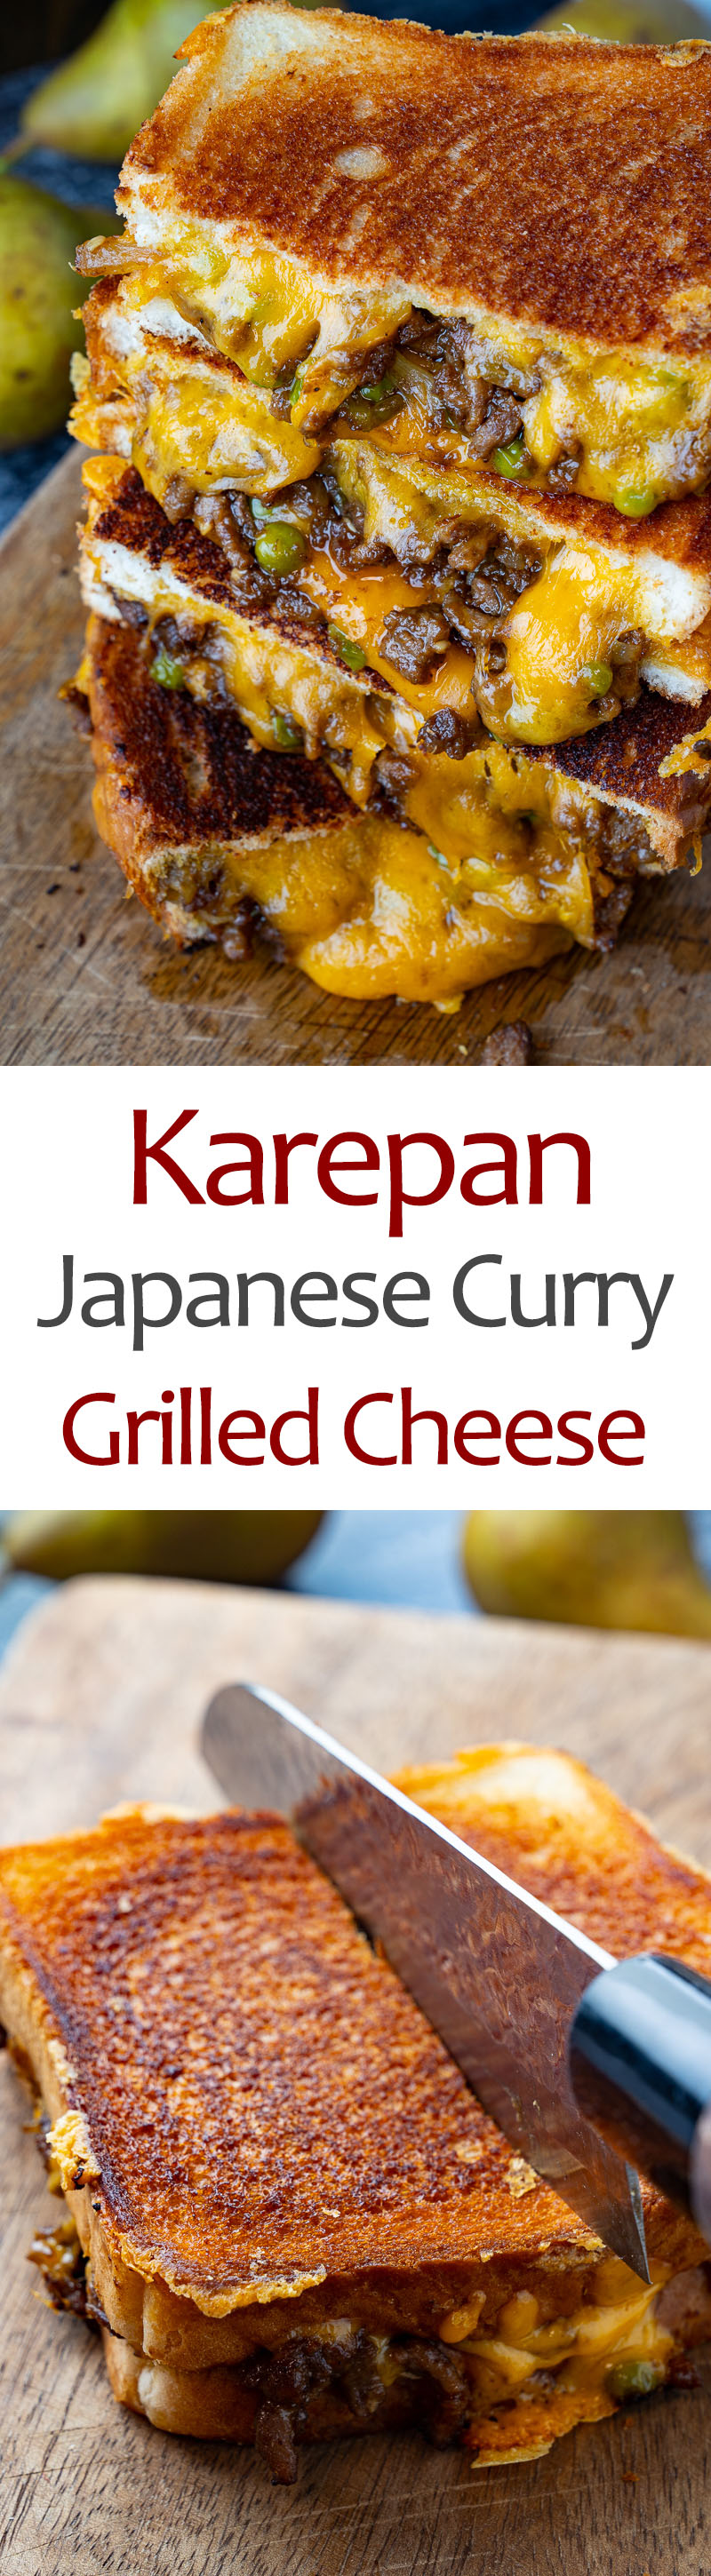 https://www.closetcooking.com/wp-content/uploads/2020/04/Karepan-Japanese-Curry-Grilled-Cheese.jpg